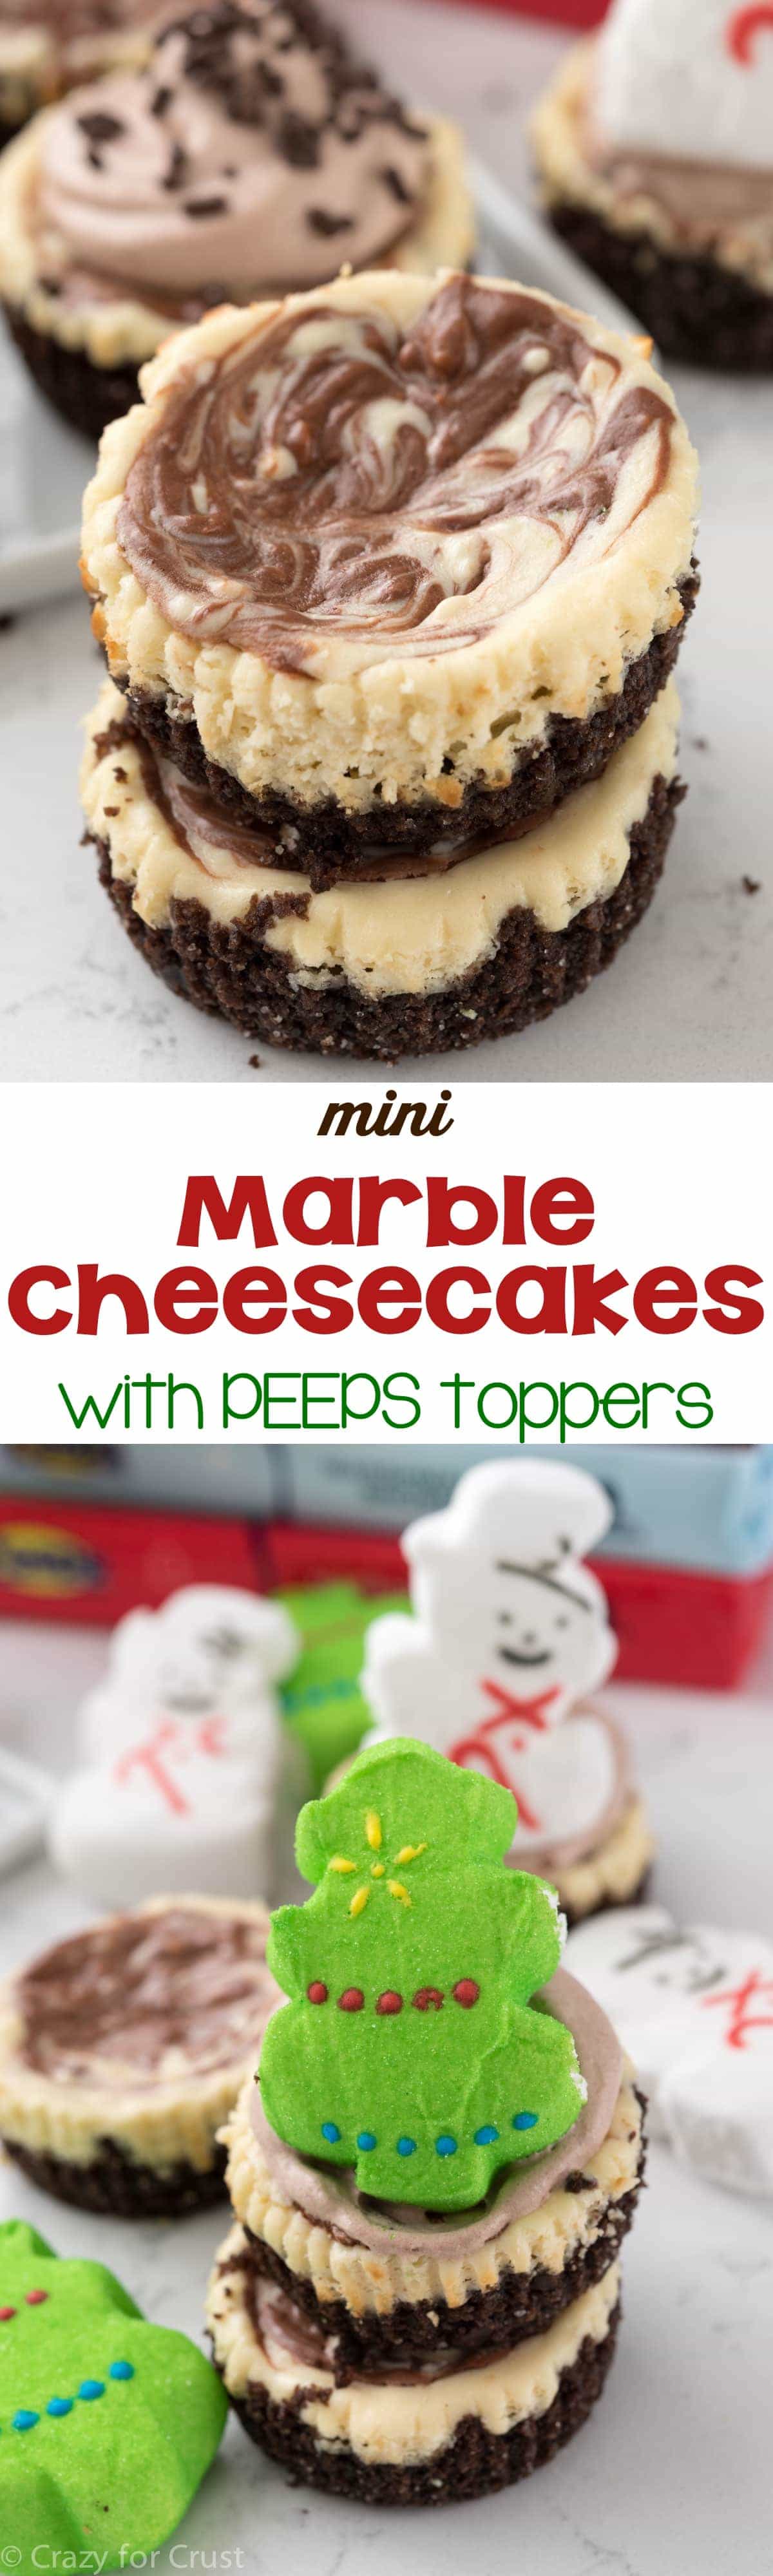 Mini Marble Cheesecakes with a PEEPS marshmallow topper - these easy mini cheesecakes are marbled with chocolate. Top with a PEEP for Christmas!